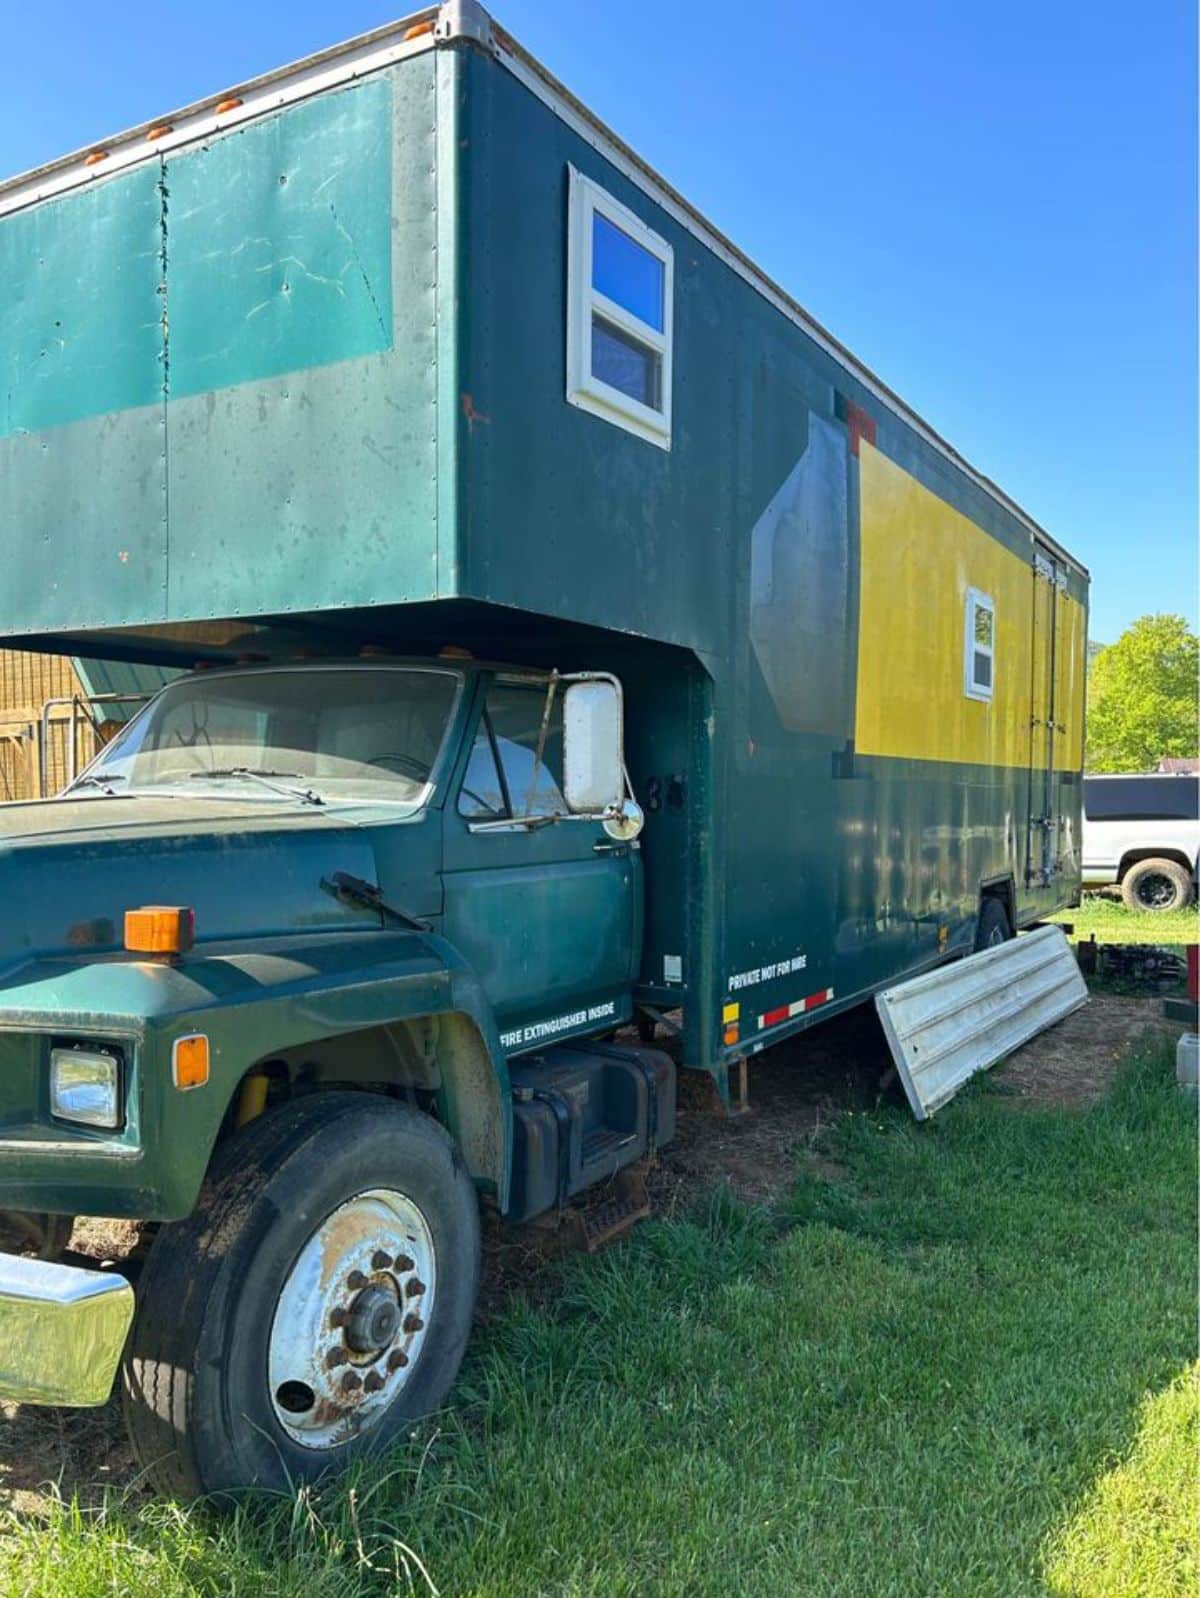 stunning front view of drivable tiny home